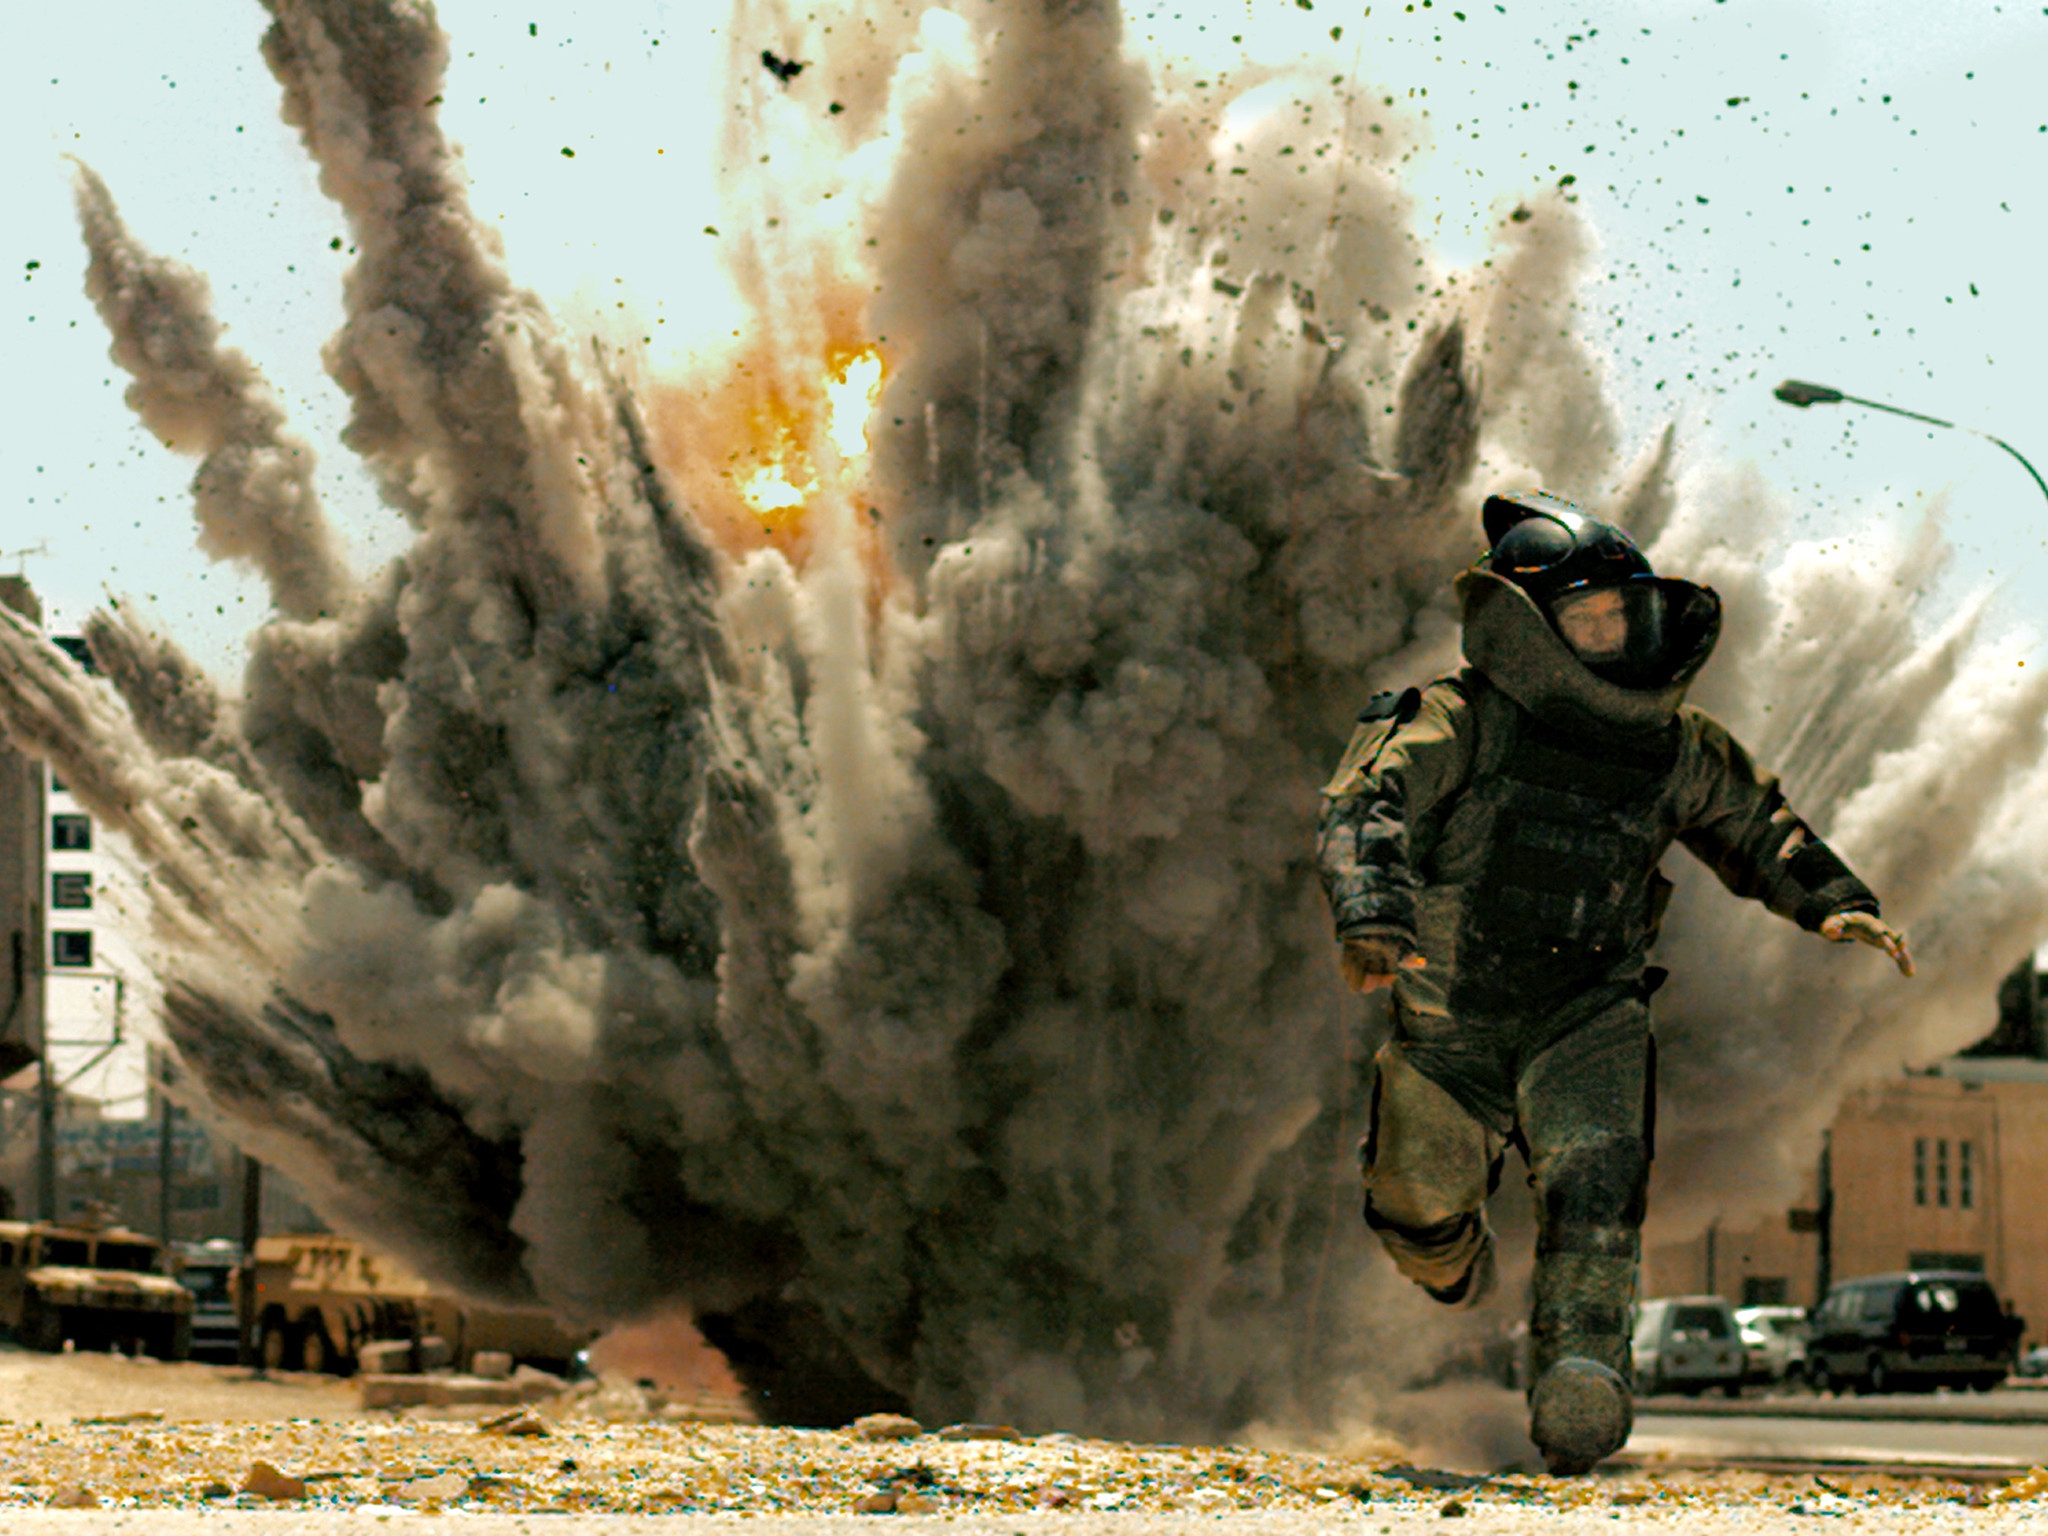 2048x1536 From American Sniper to Timbuktu: how should cinema respond to terrorism? |  The Independent